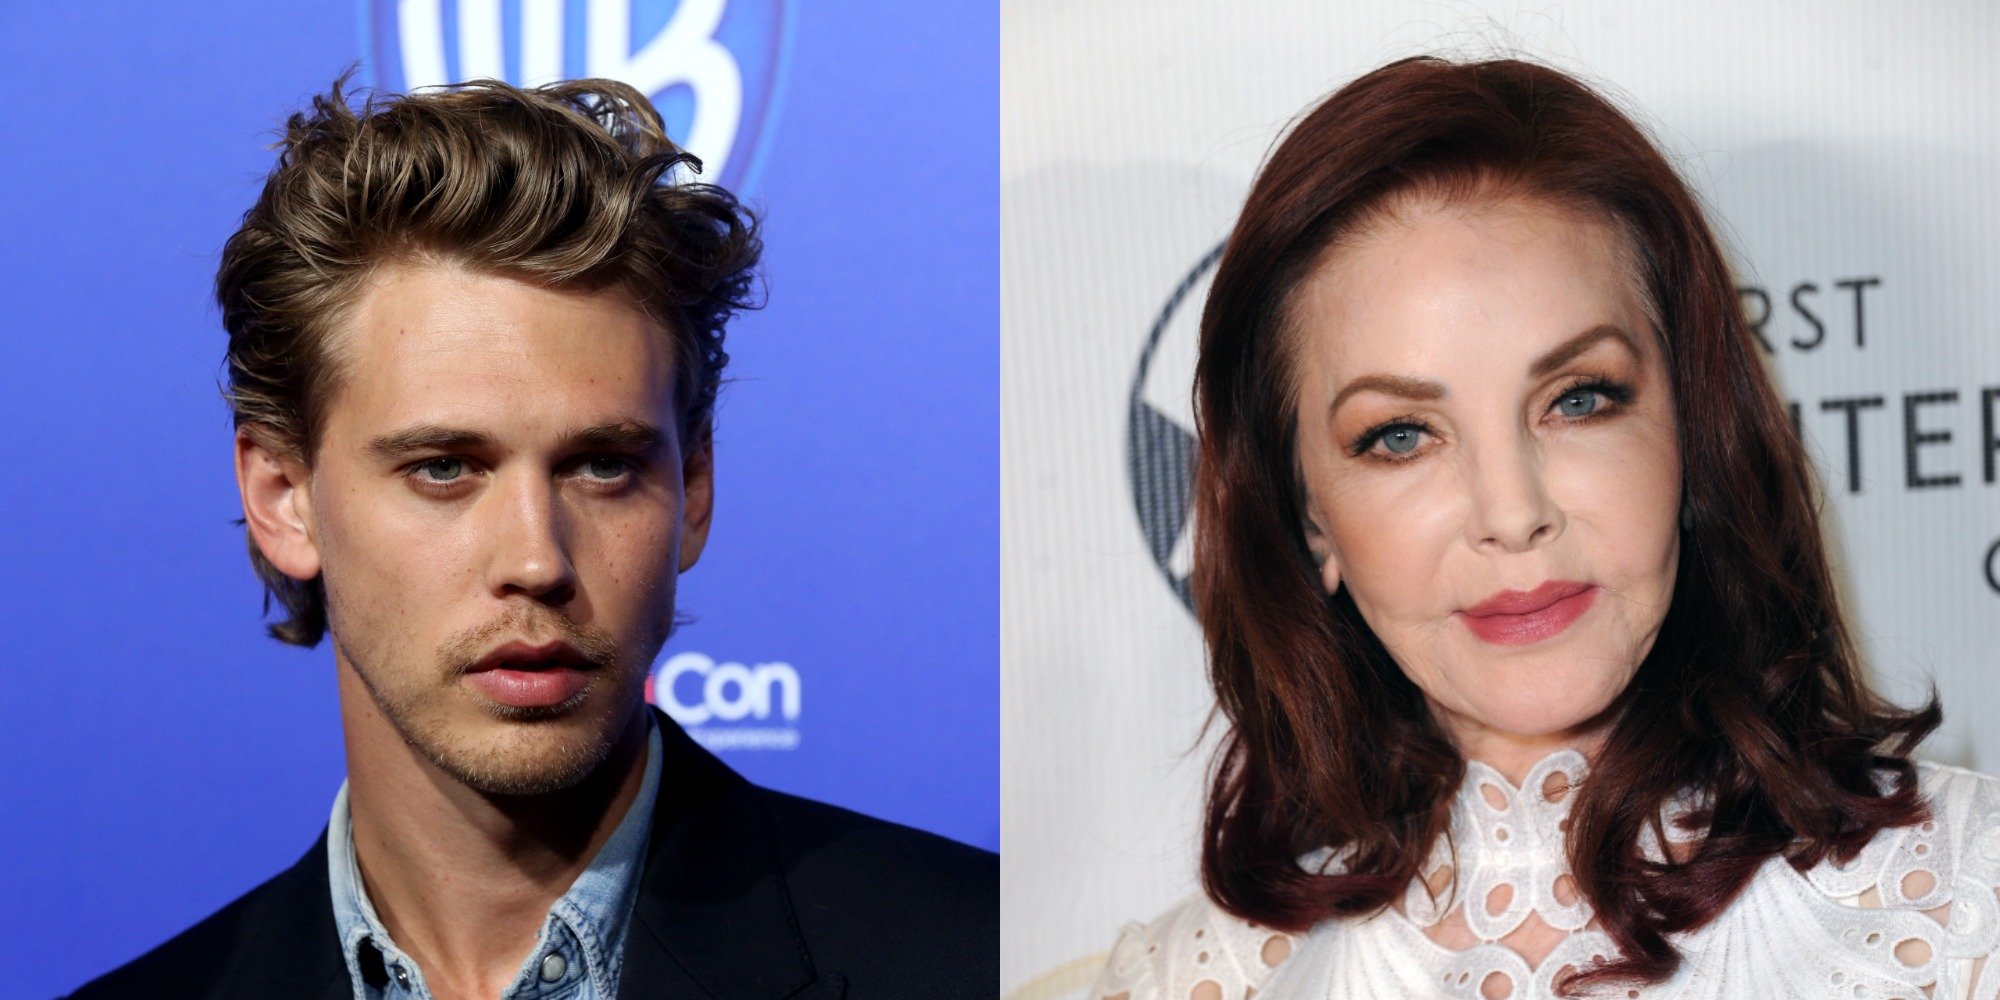 Austin Butler and Priscilla Presley in a set of side by side photographs.